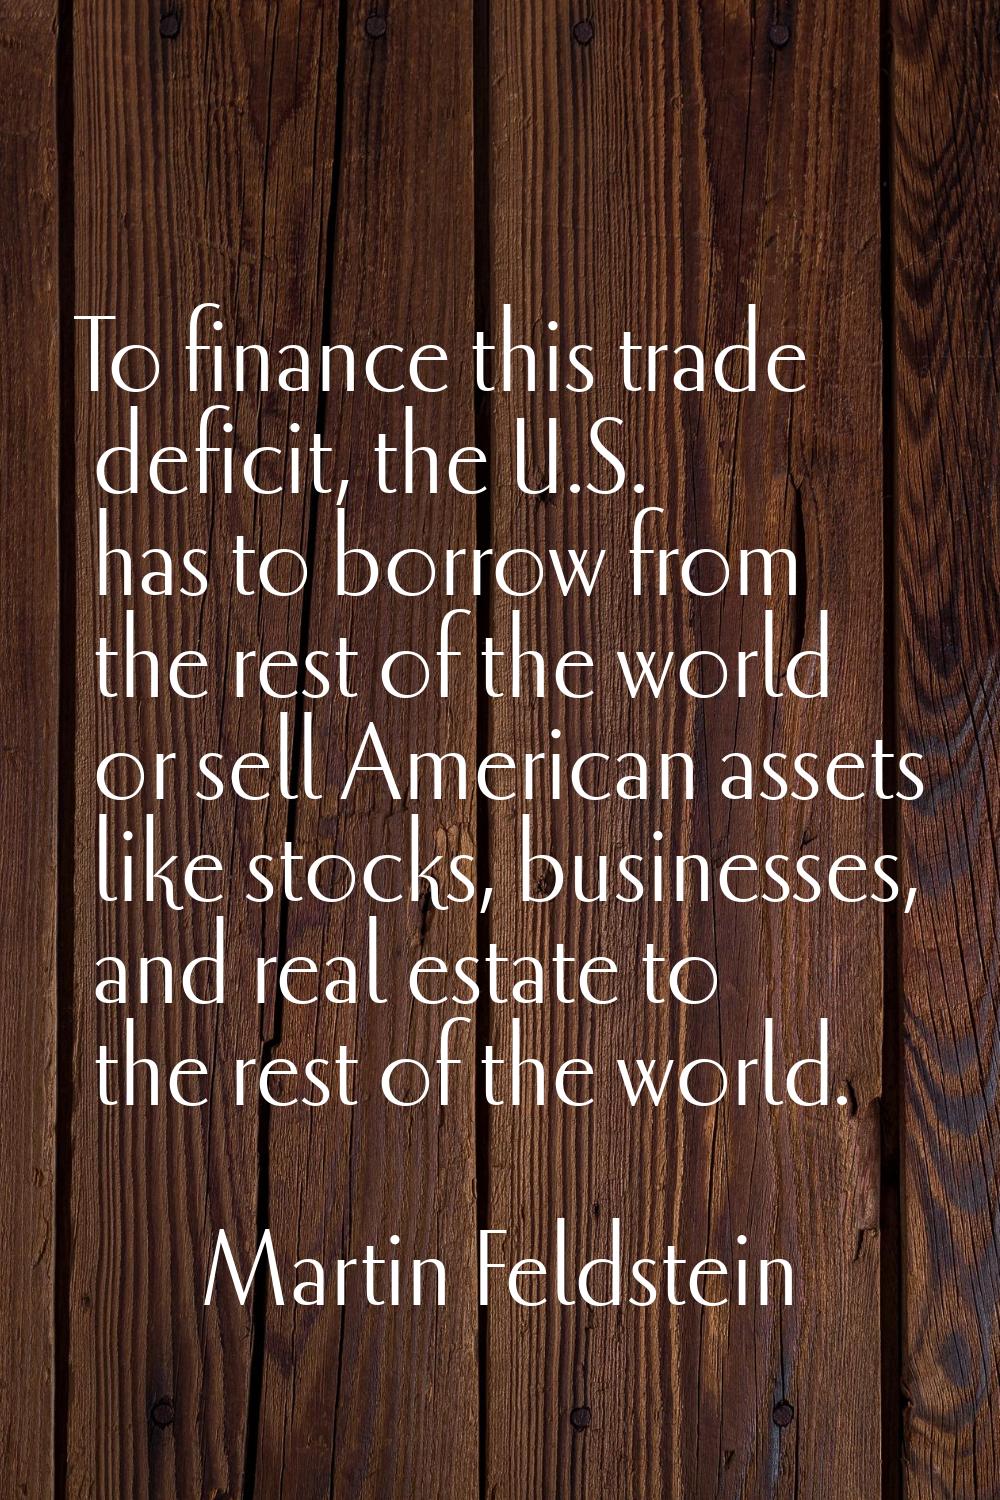 To finance this trade deficit, the U.S. has to borrow from the rest of the world or sell American a